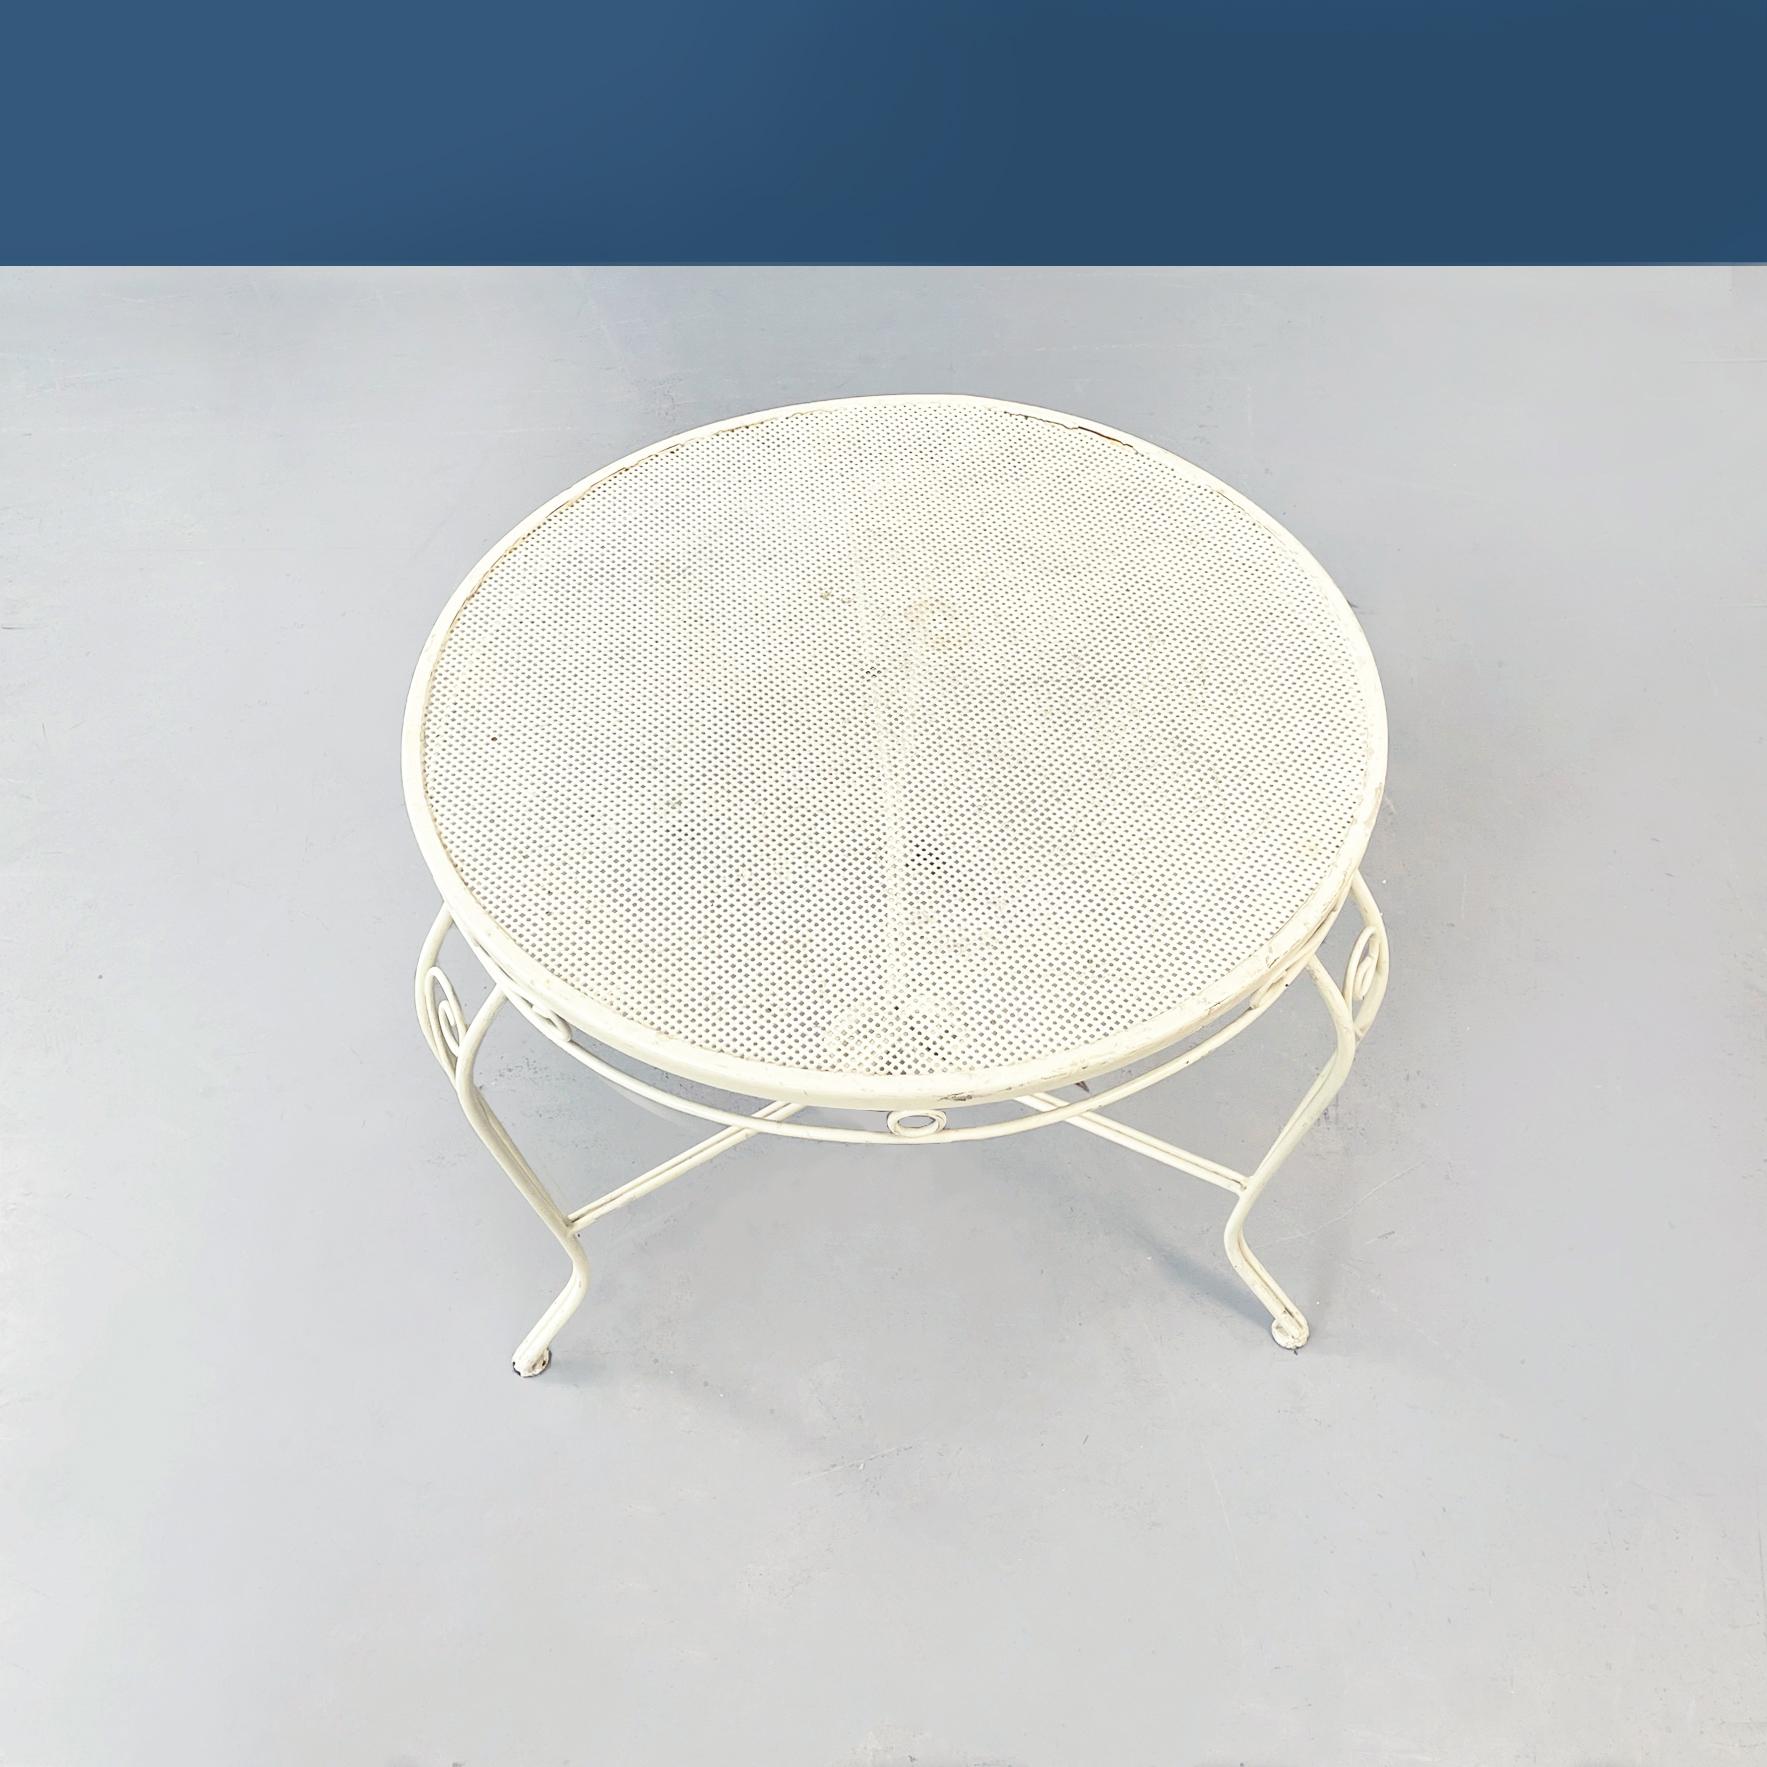 Italian Mid-Century Modern Garden Chairs and Table in White Wrought Iron, 1960s For Sale 11